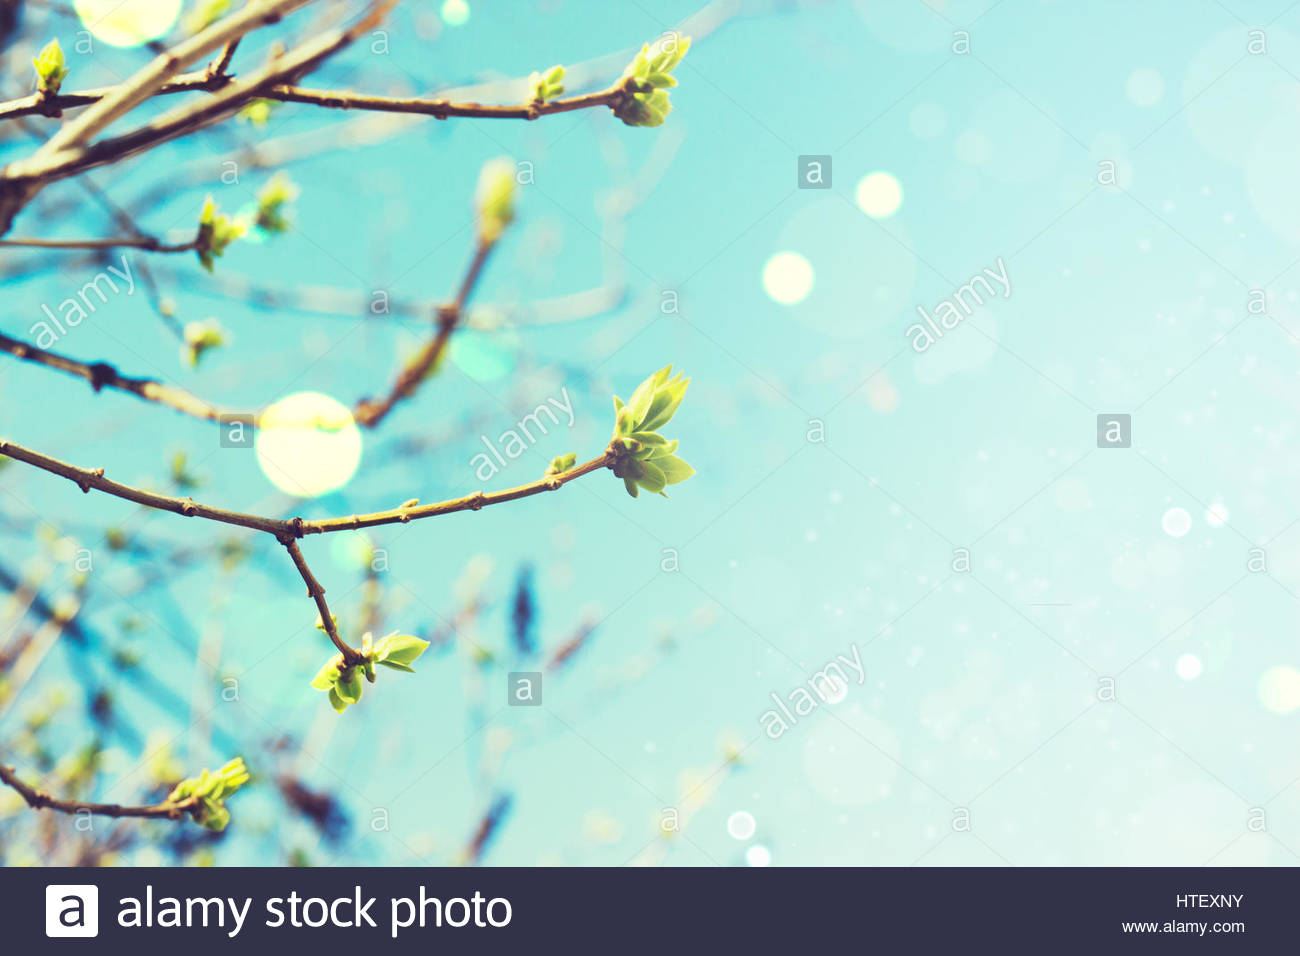 Abstract springtime background Stock Photo 135552647